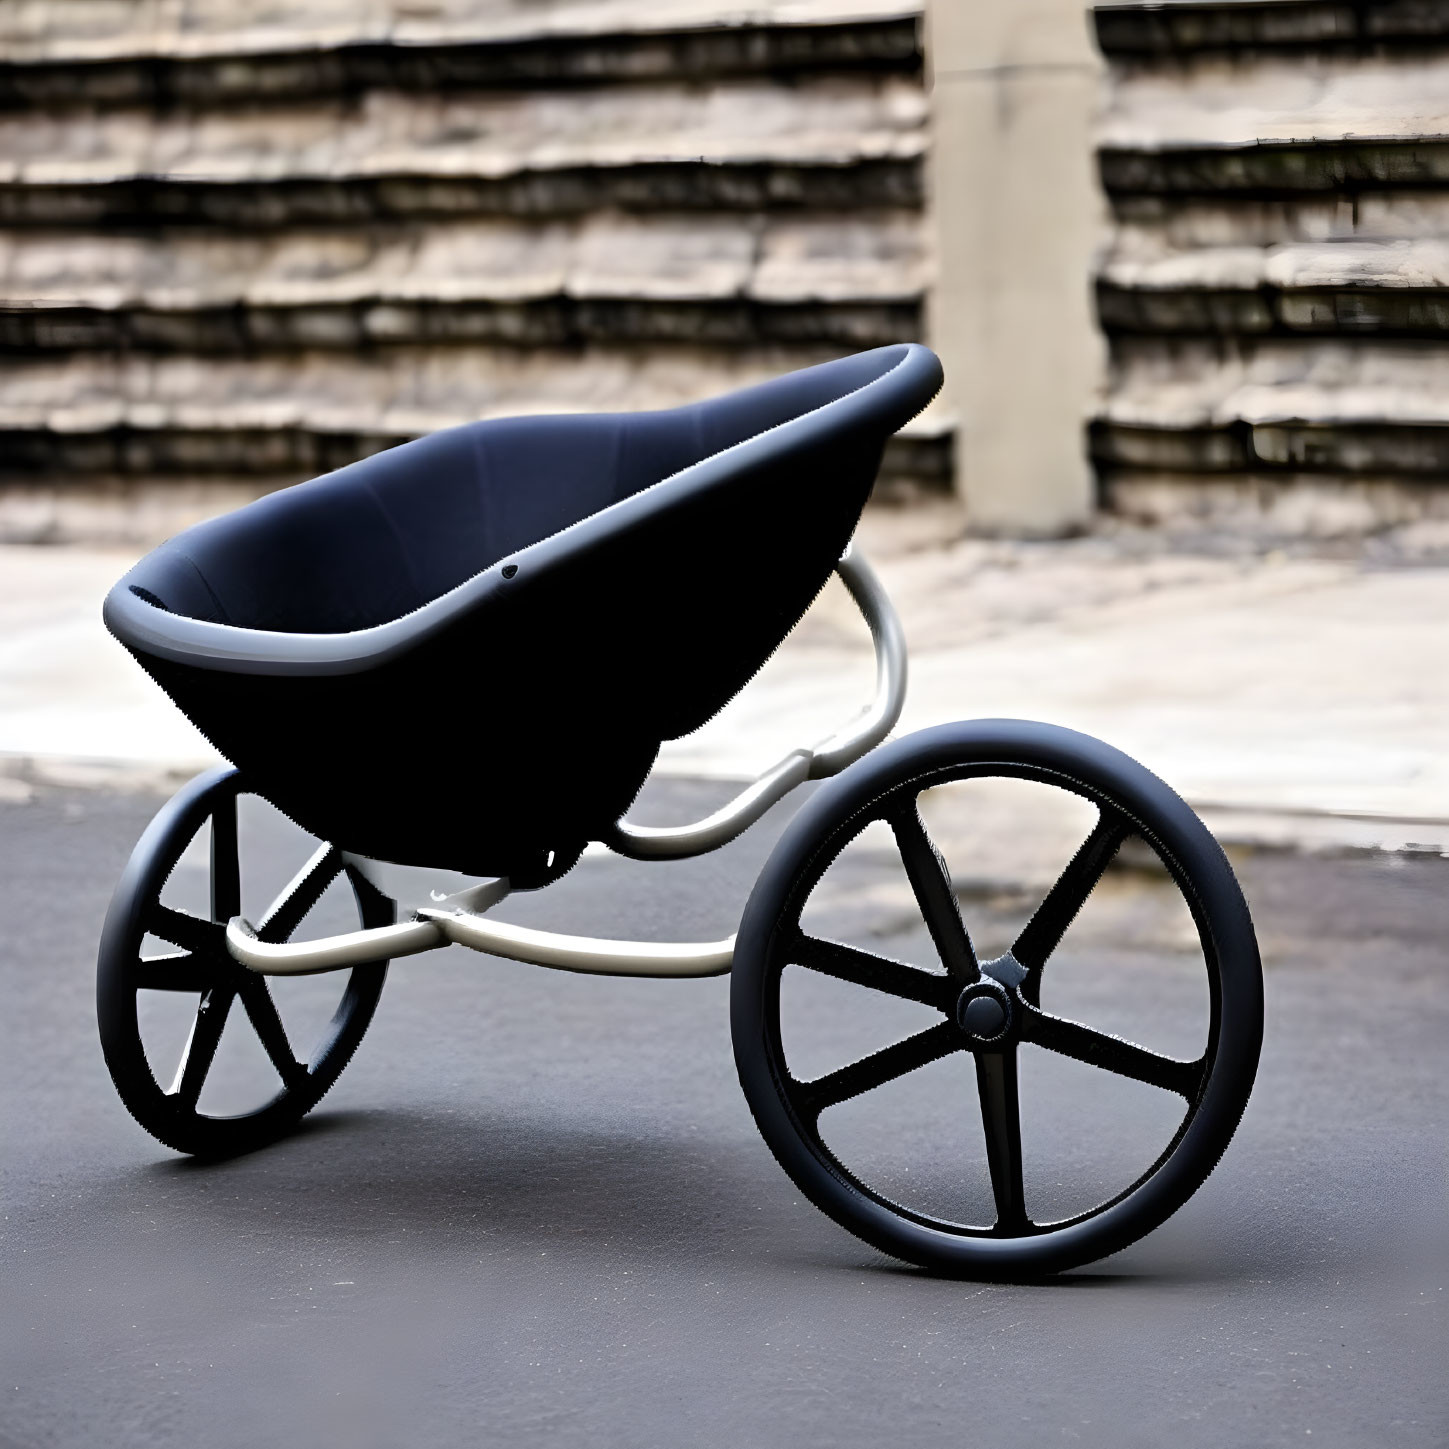 Navy Blue Baby Stroller with Large Black Wheels on Concrete Surface